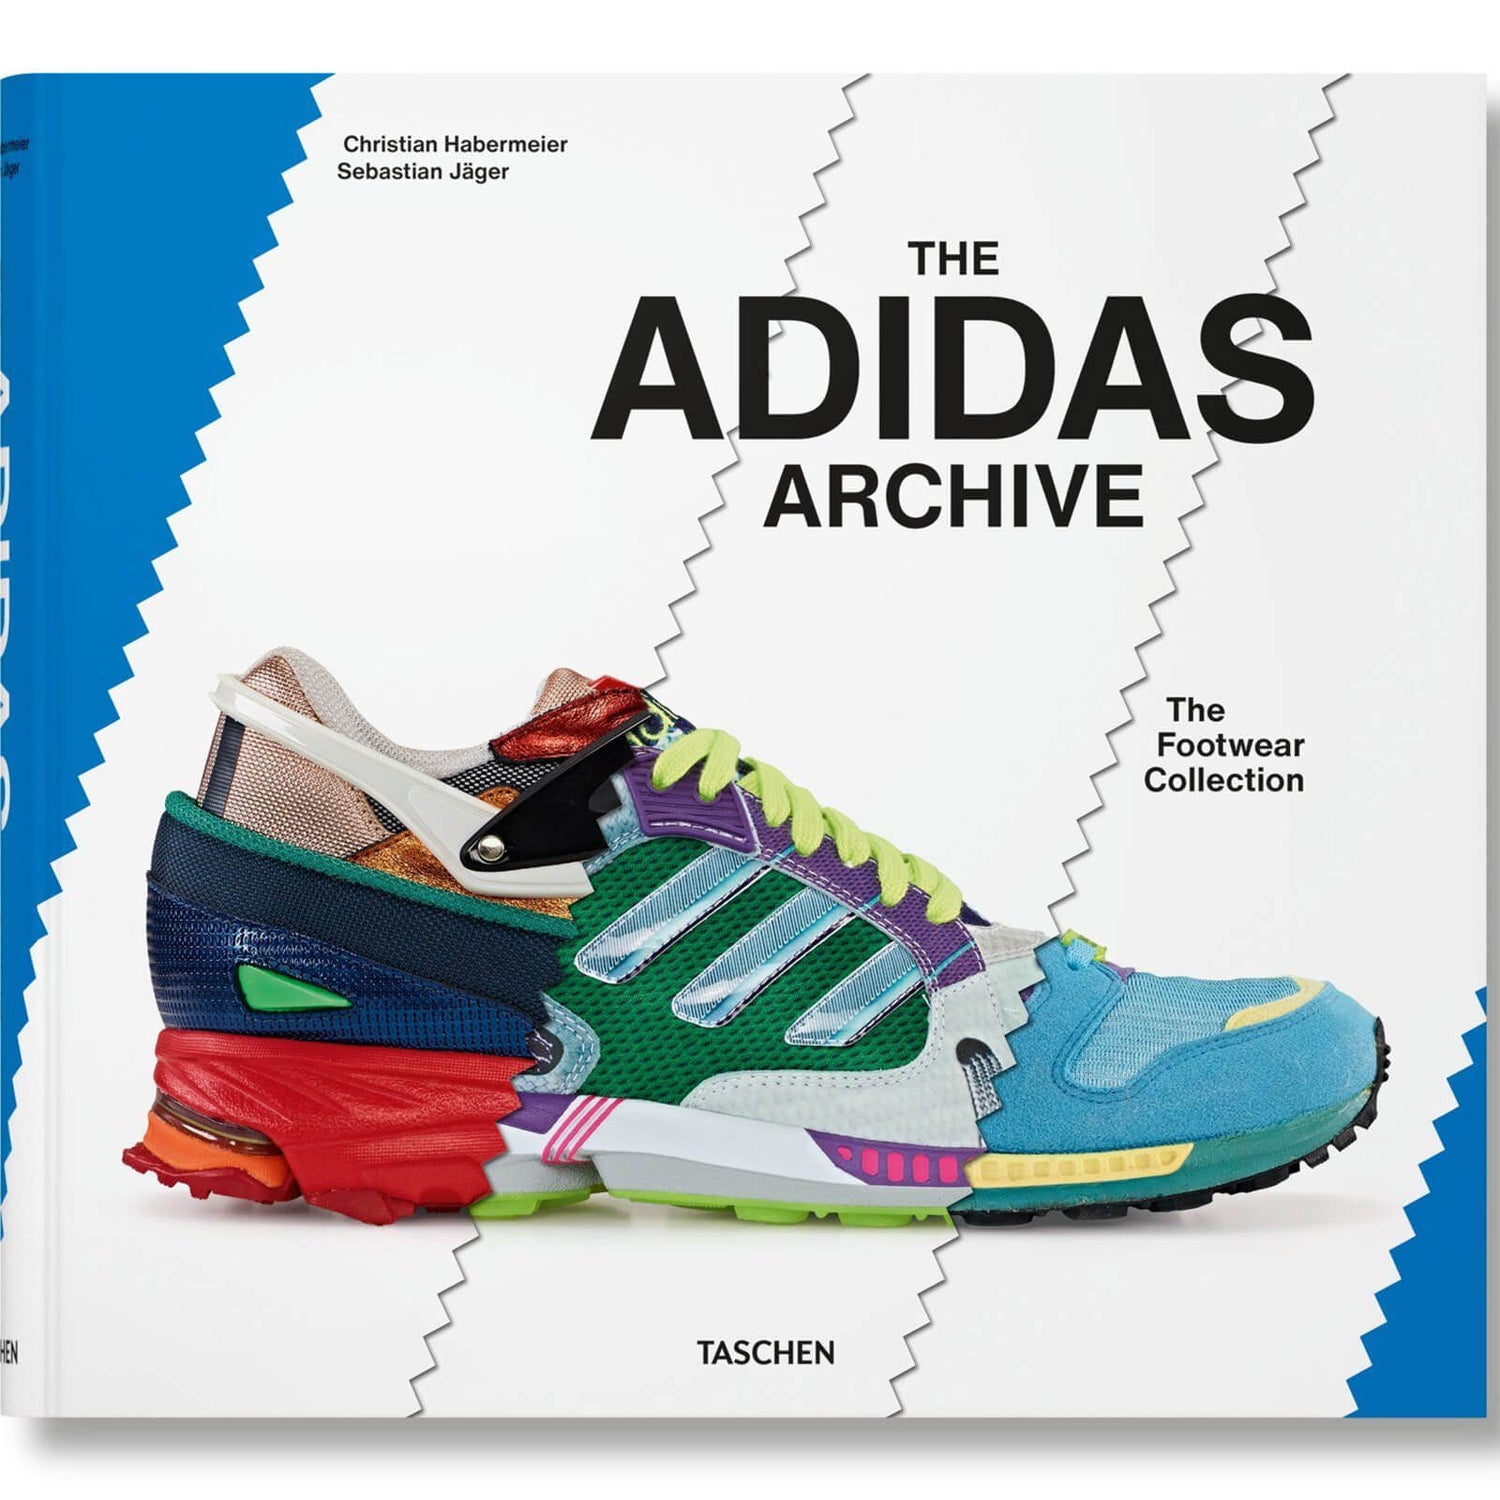 The Adidas Archive - The Footwear Collection